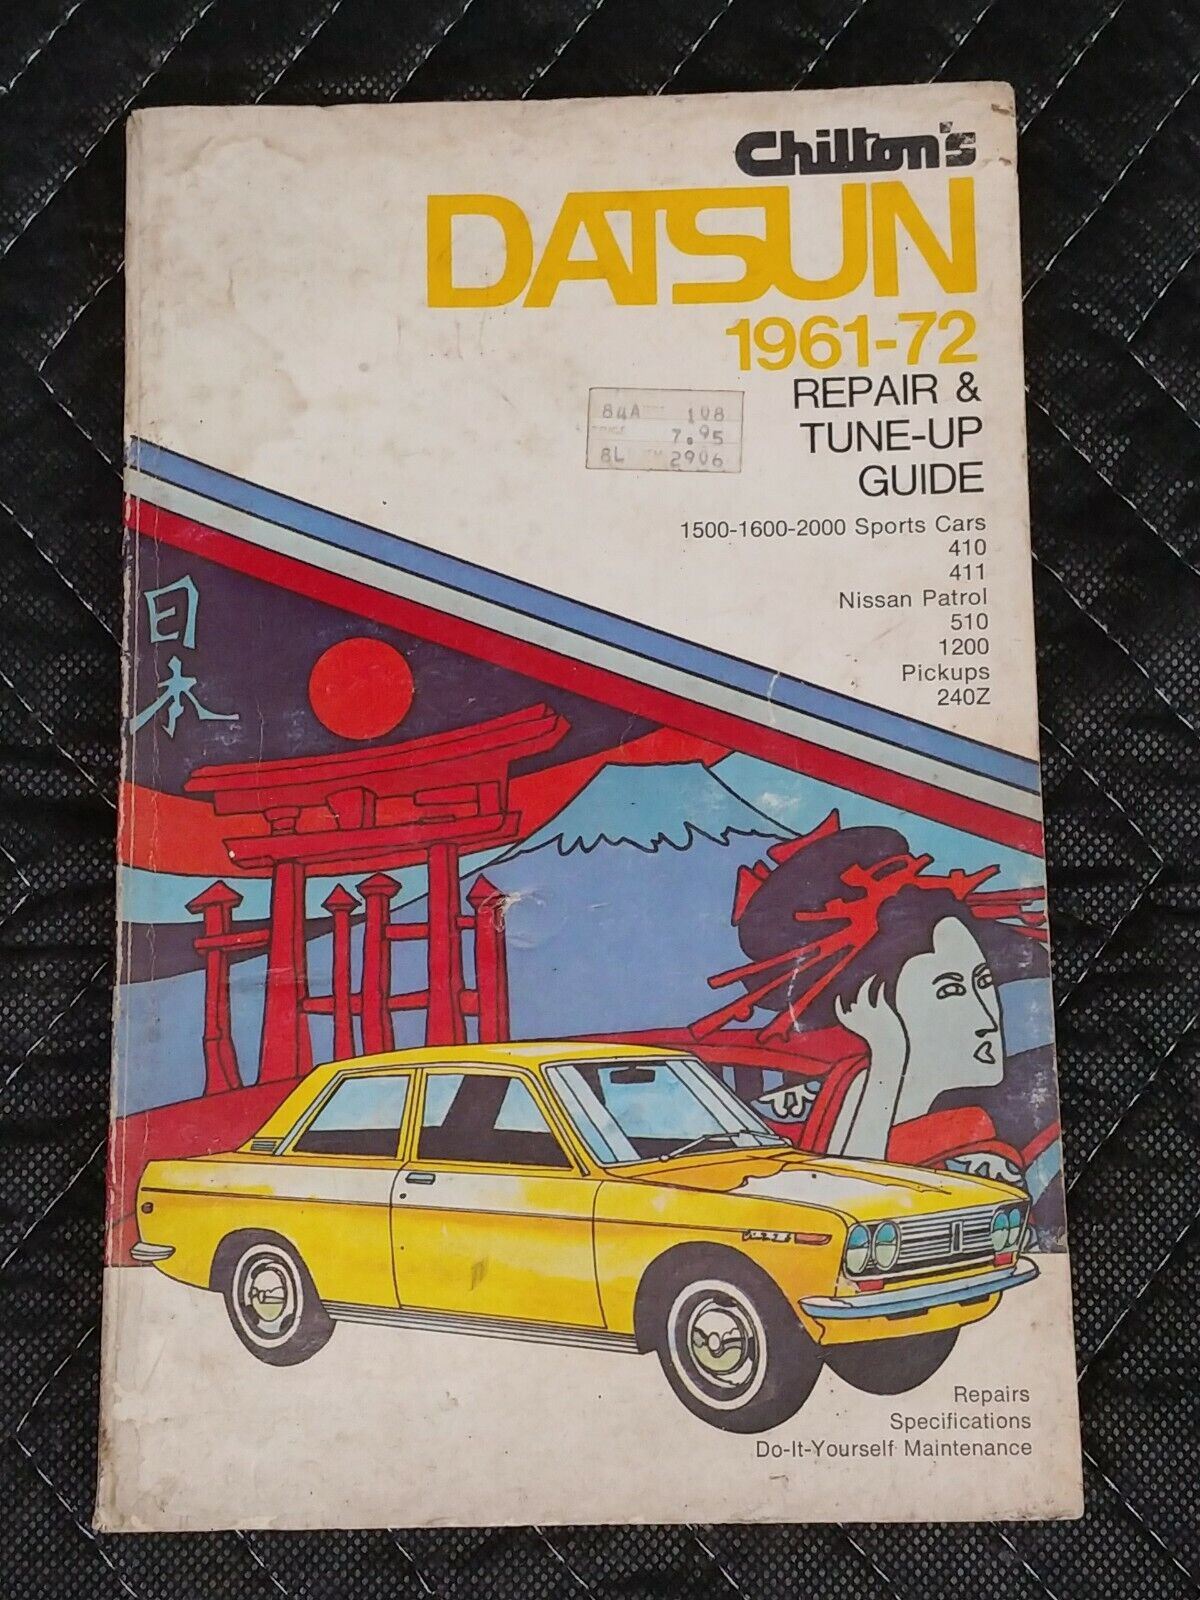 CHILTONS REPAIR & TUNE-UP GUIDE FOR DATSUN 1961-72